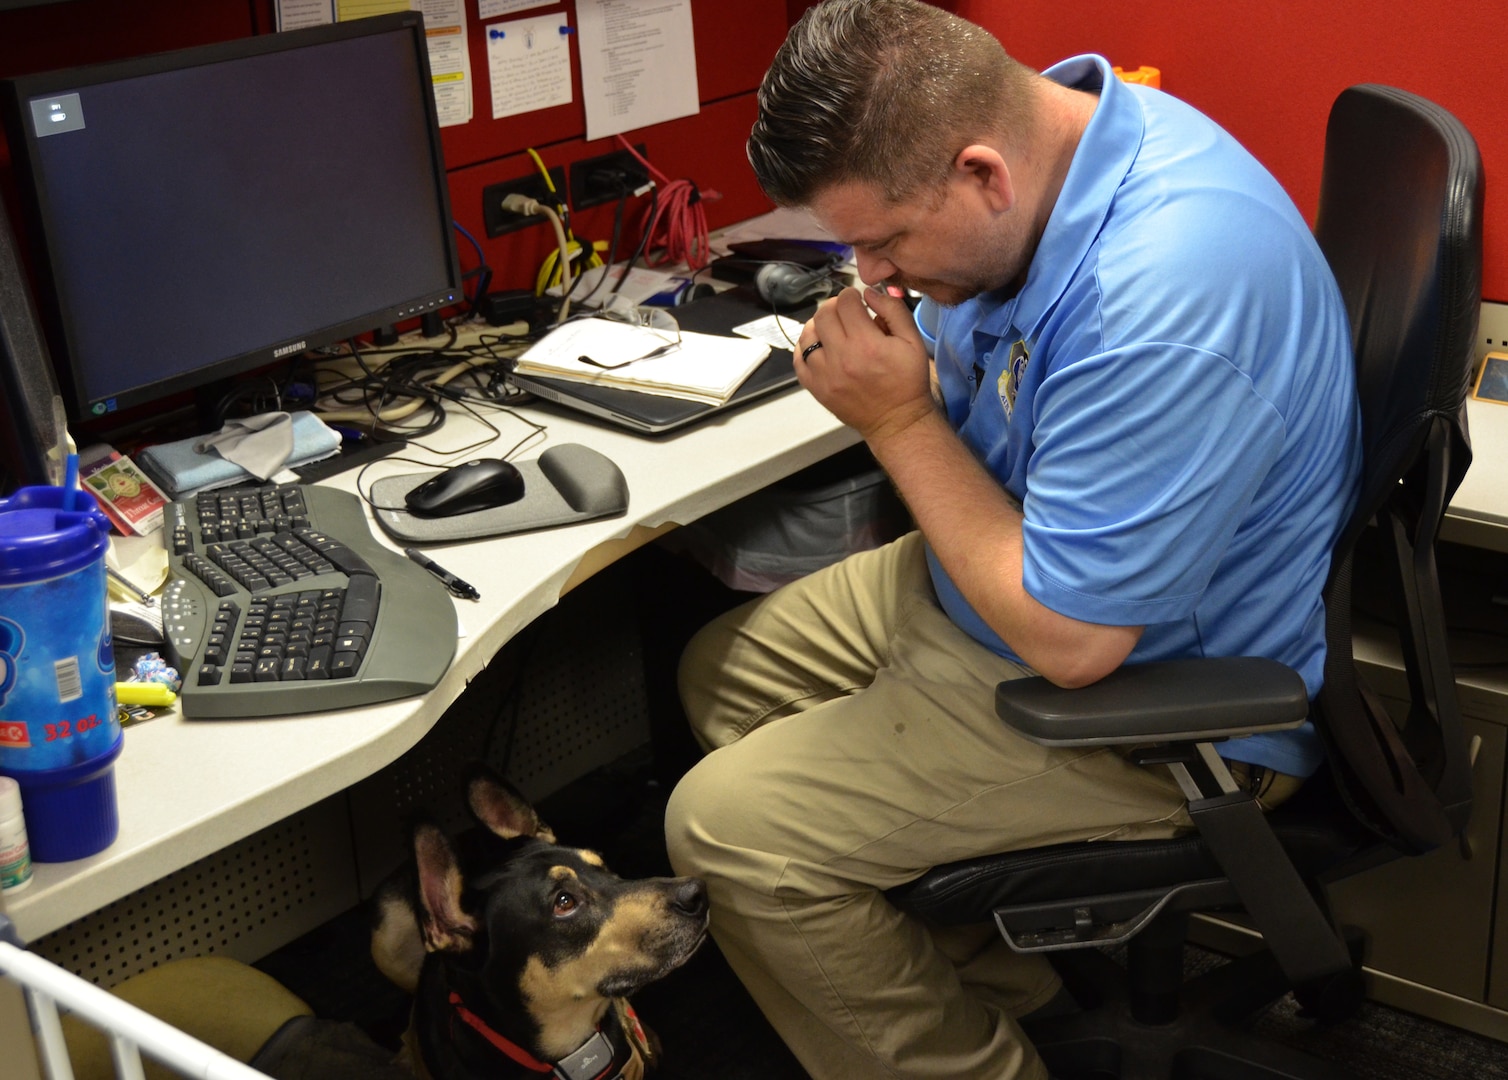 Ryan Kaono, a support agreement manager with the Air Force Installation and Mission Support Center, takes a moment to breath while his service dog Romeo assesses the situation. Romeo helps Kaono quickly recover from bouts of anxiety and night terrors related to enemy attacks while he was deployed to Saudi Arabia and Iraq.